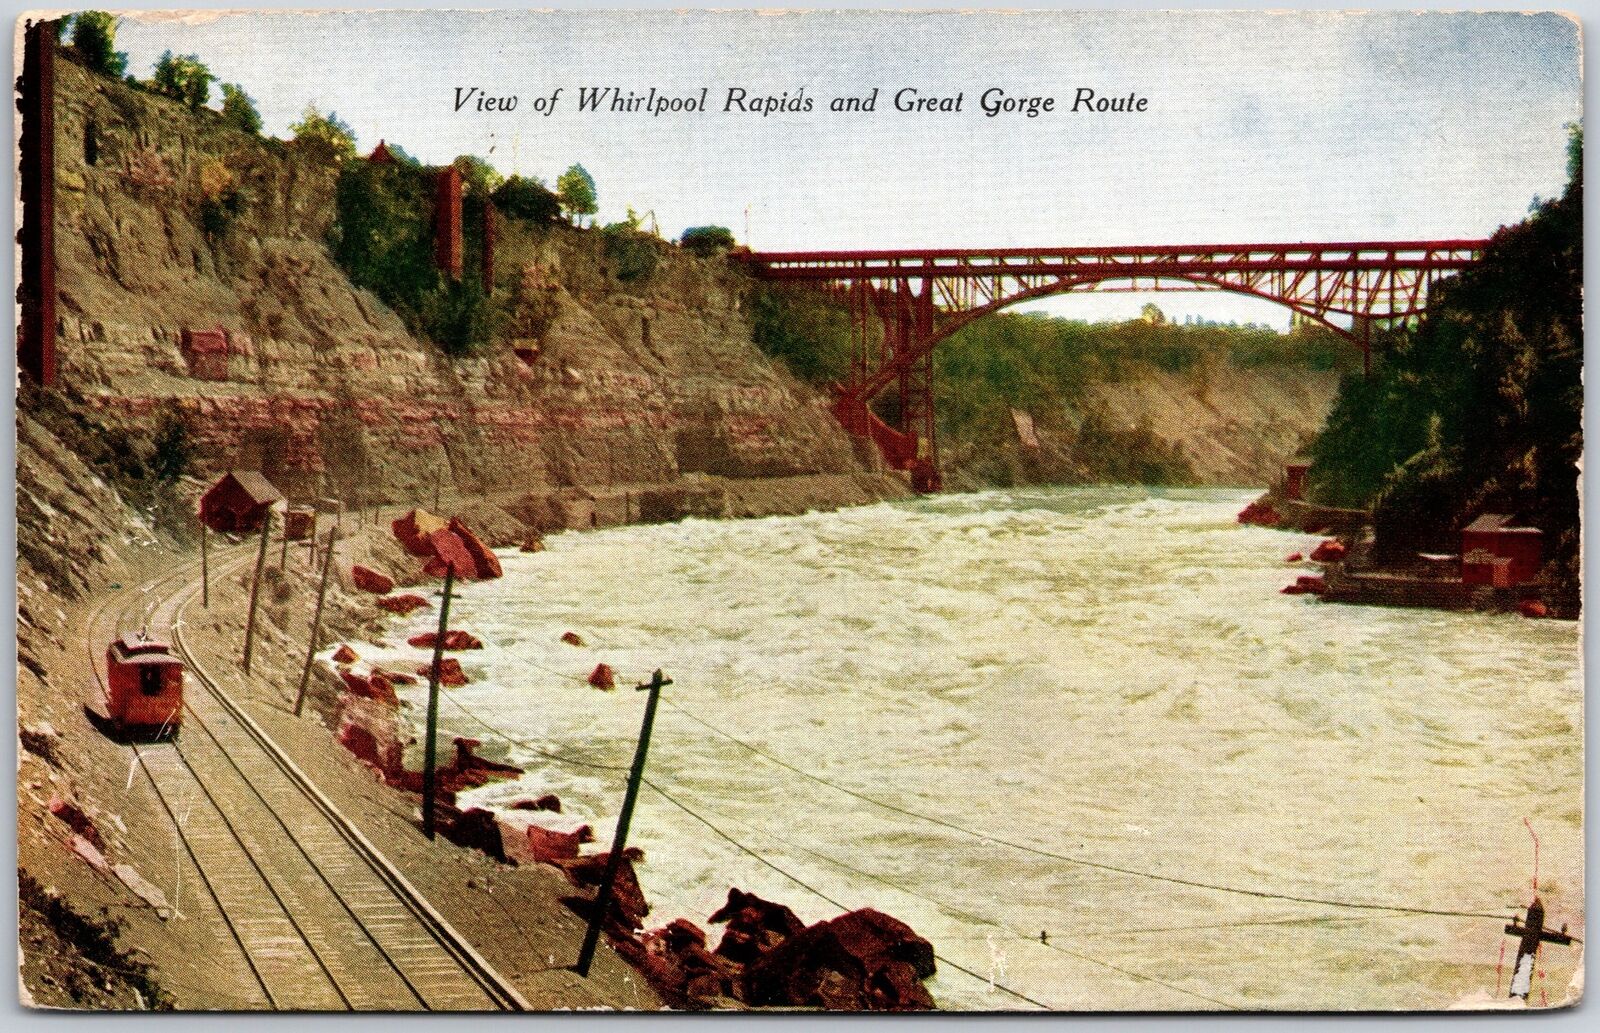 Niagara Falls Canada, View of Whirlpool Rapids and Great Gorge Route, Postcard